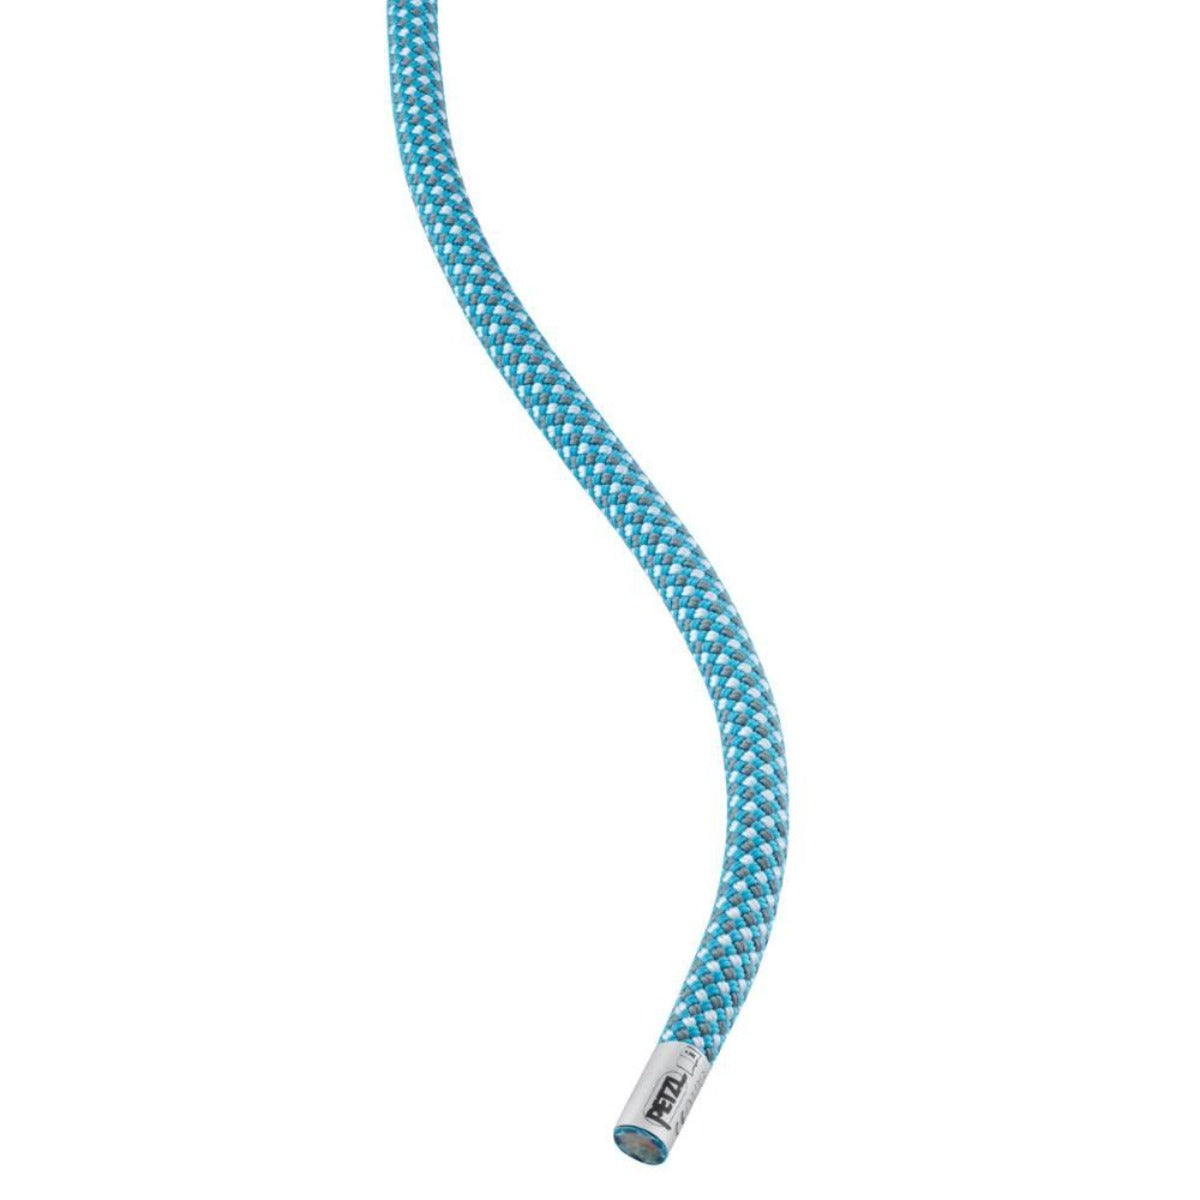 Petzl Mambo 10.1mm Rope - 50mtrs - Turquoise 3